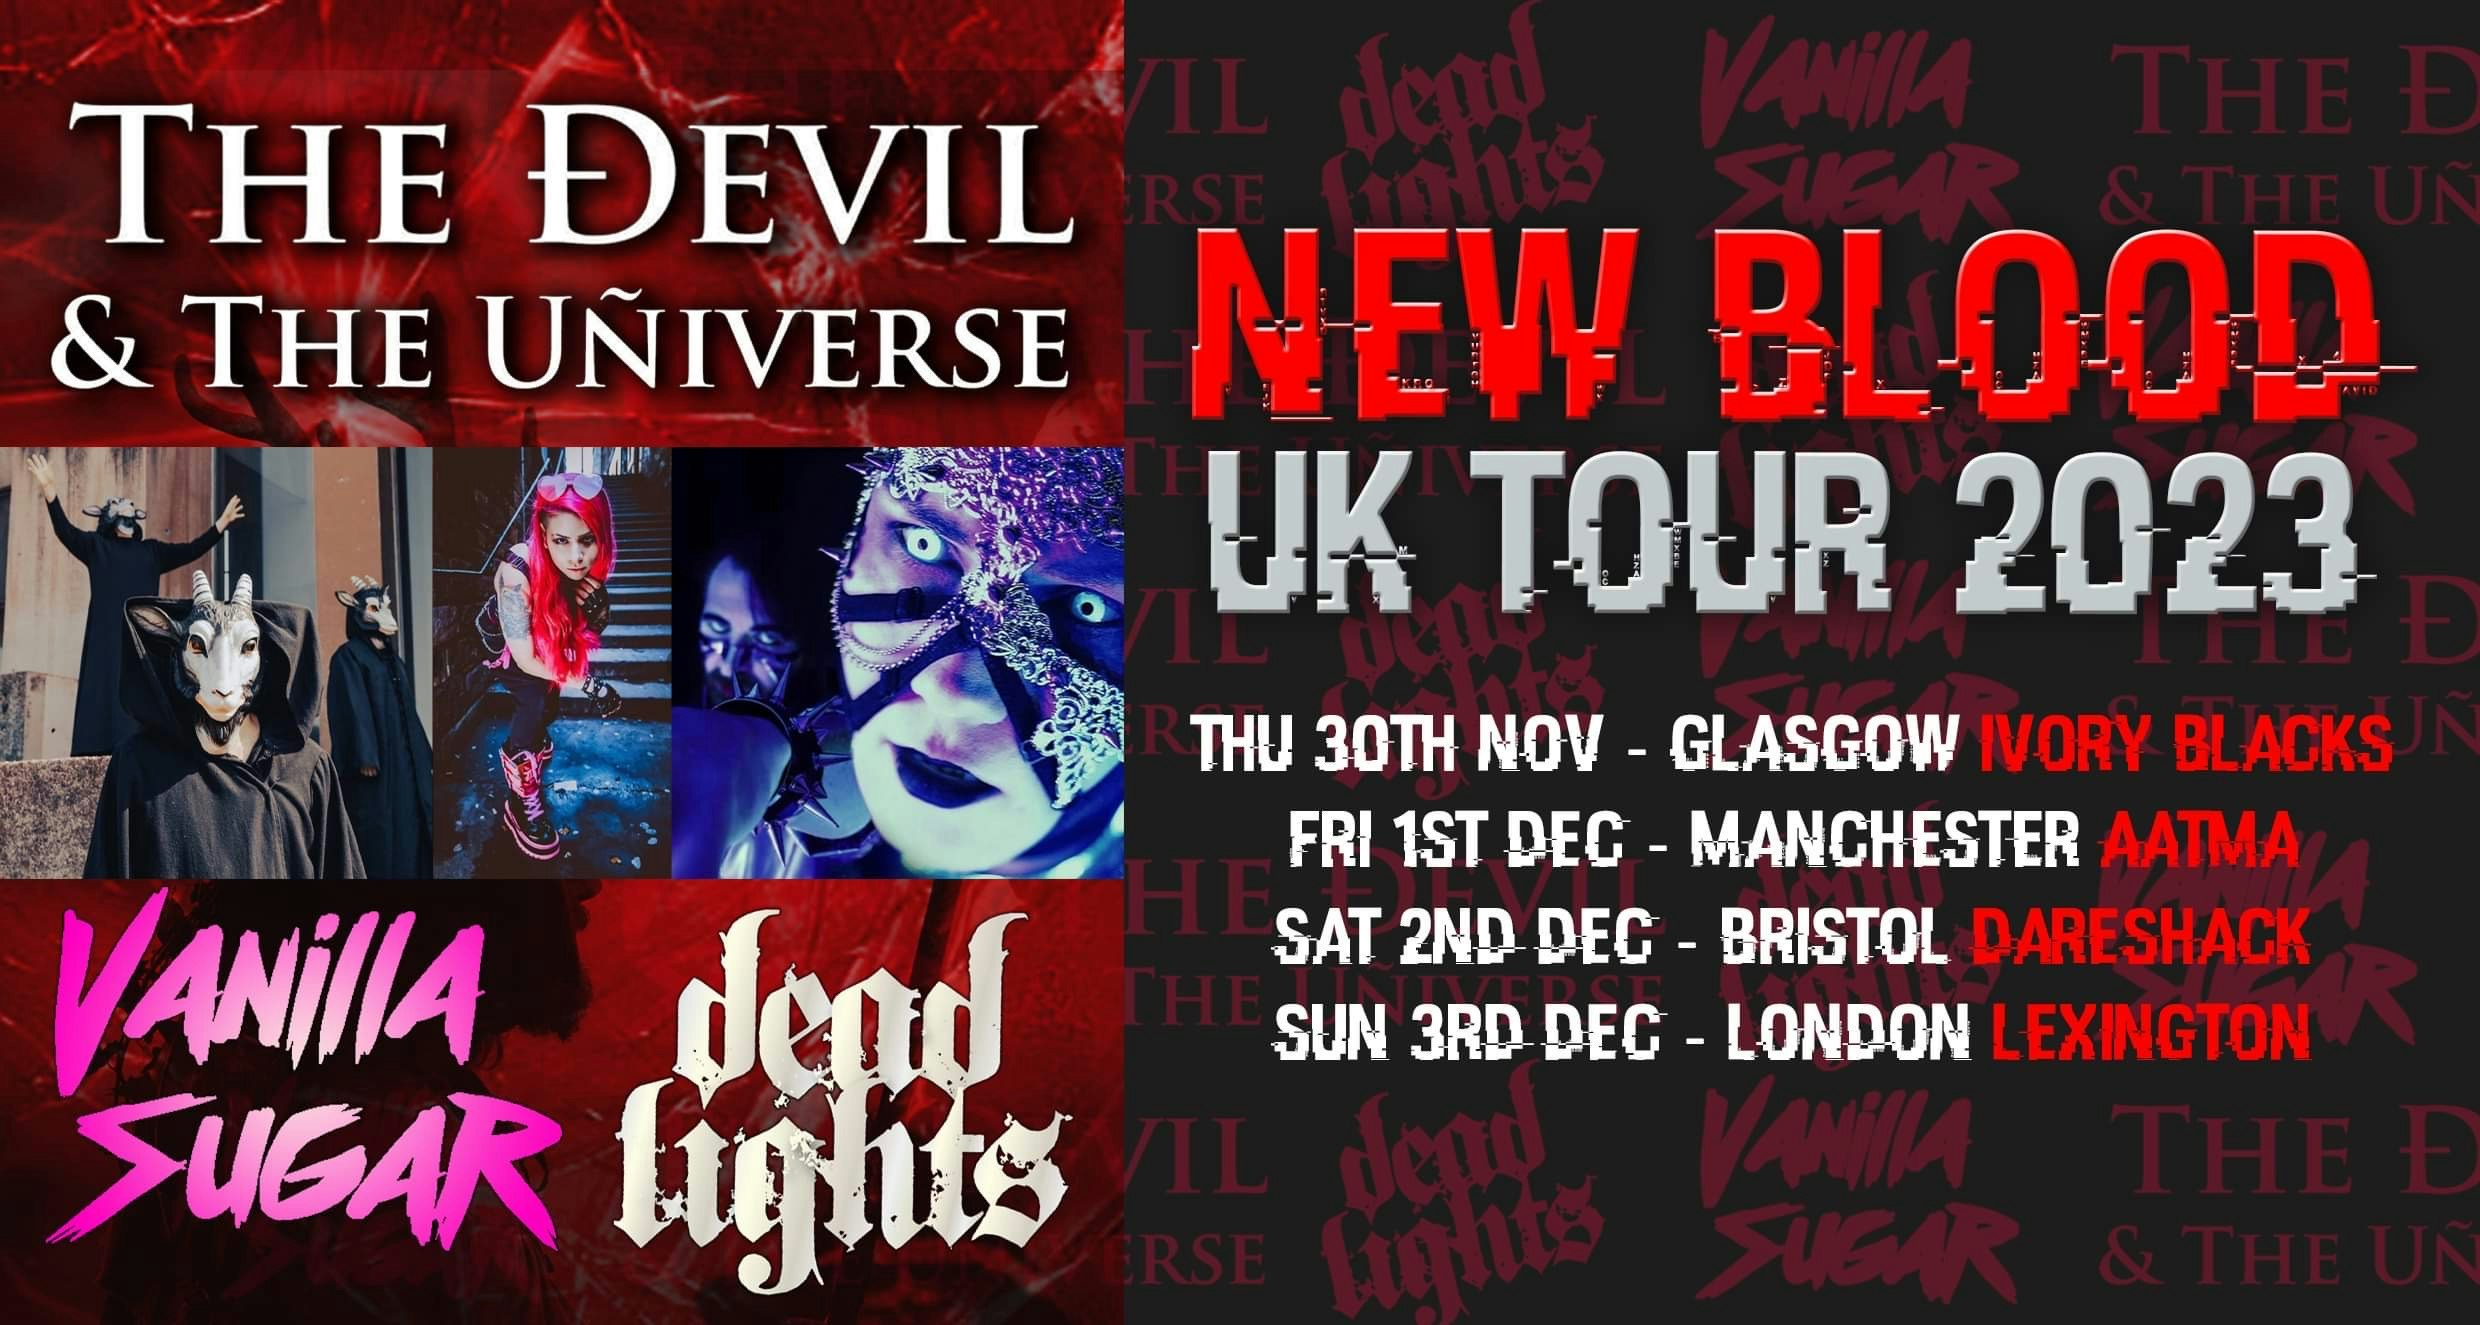 NEW BLOOD UK TOUR 2023 with The Devil and the Universe + Dead Lights & Vanilla Sugar